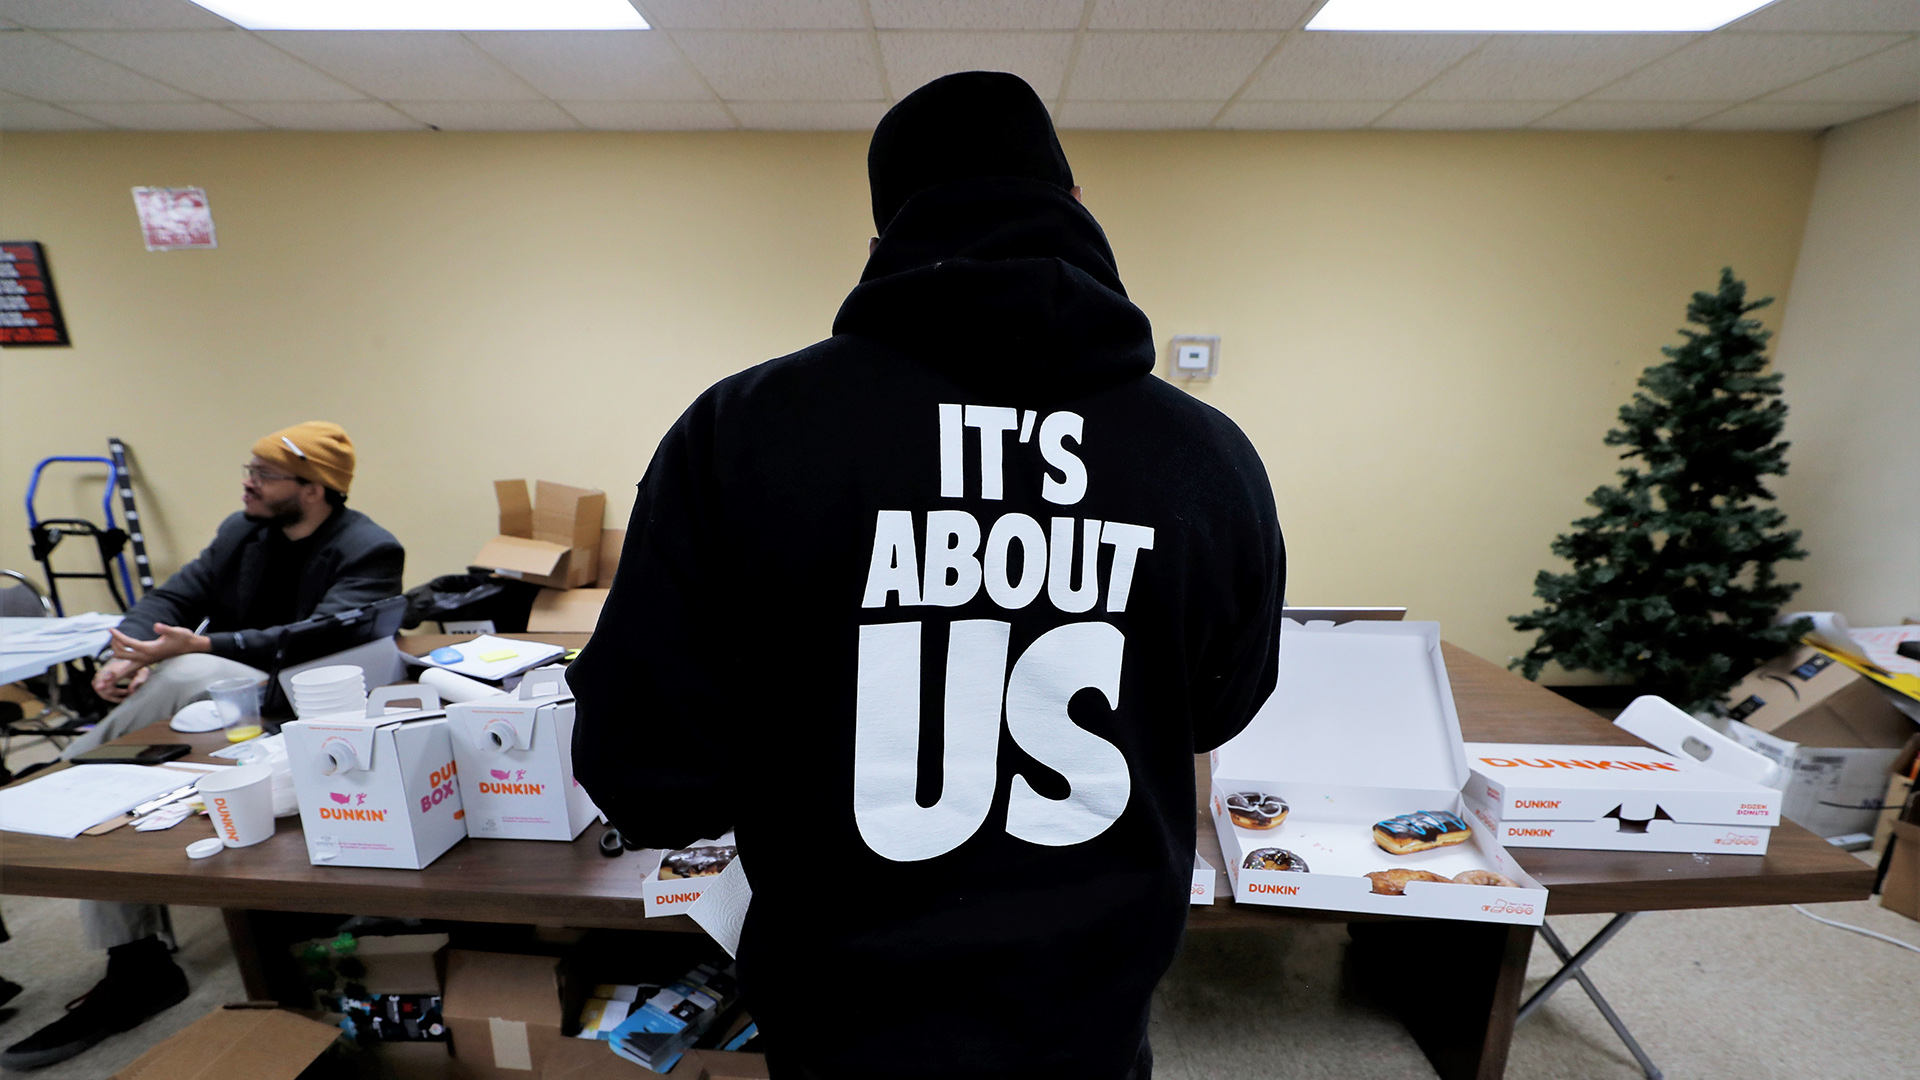 A person wearing a shirt with the words "It's About US" stenciled on the back stands and faces folding tables stacked with boxes of donuts and coffee, with another person seated to the side in a room with stacked boxes and an artificial Christmas tree.